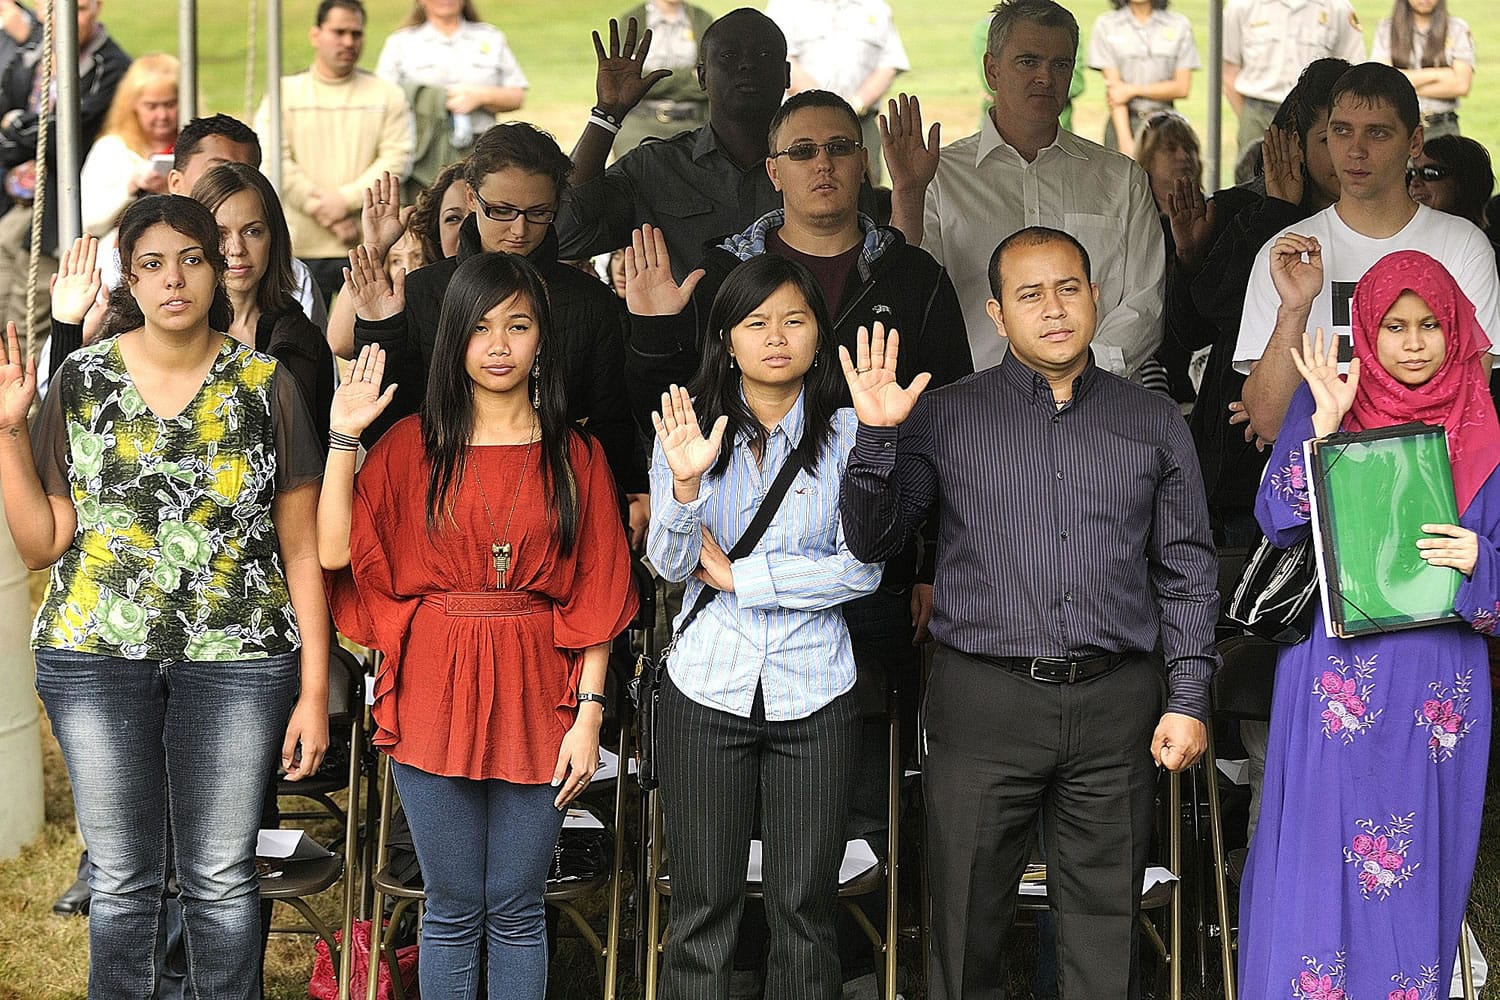 From left to right, Mervat William, Charmaine Balangue, Anh Thy Le, Oscar Hernandez Juarez and Aylesha Choudhury, take the oath of allegiance at a Naturalization Ceremony Friday in Vancouver.